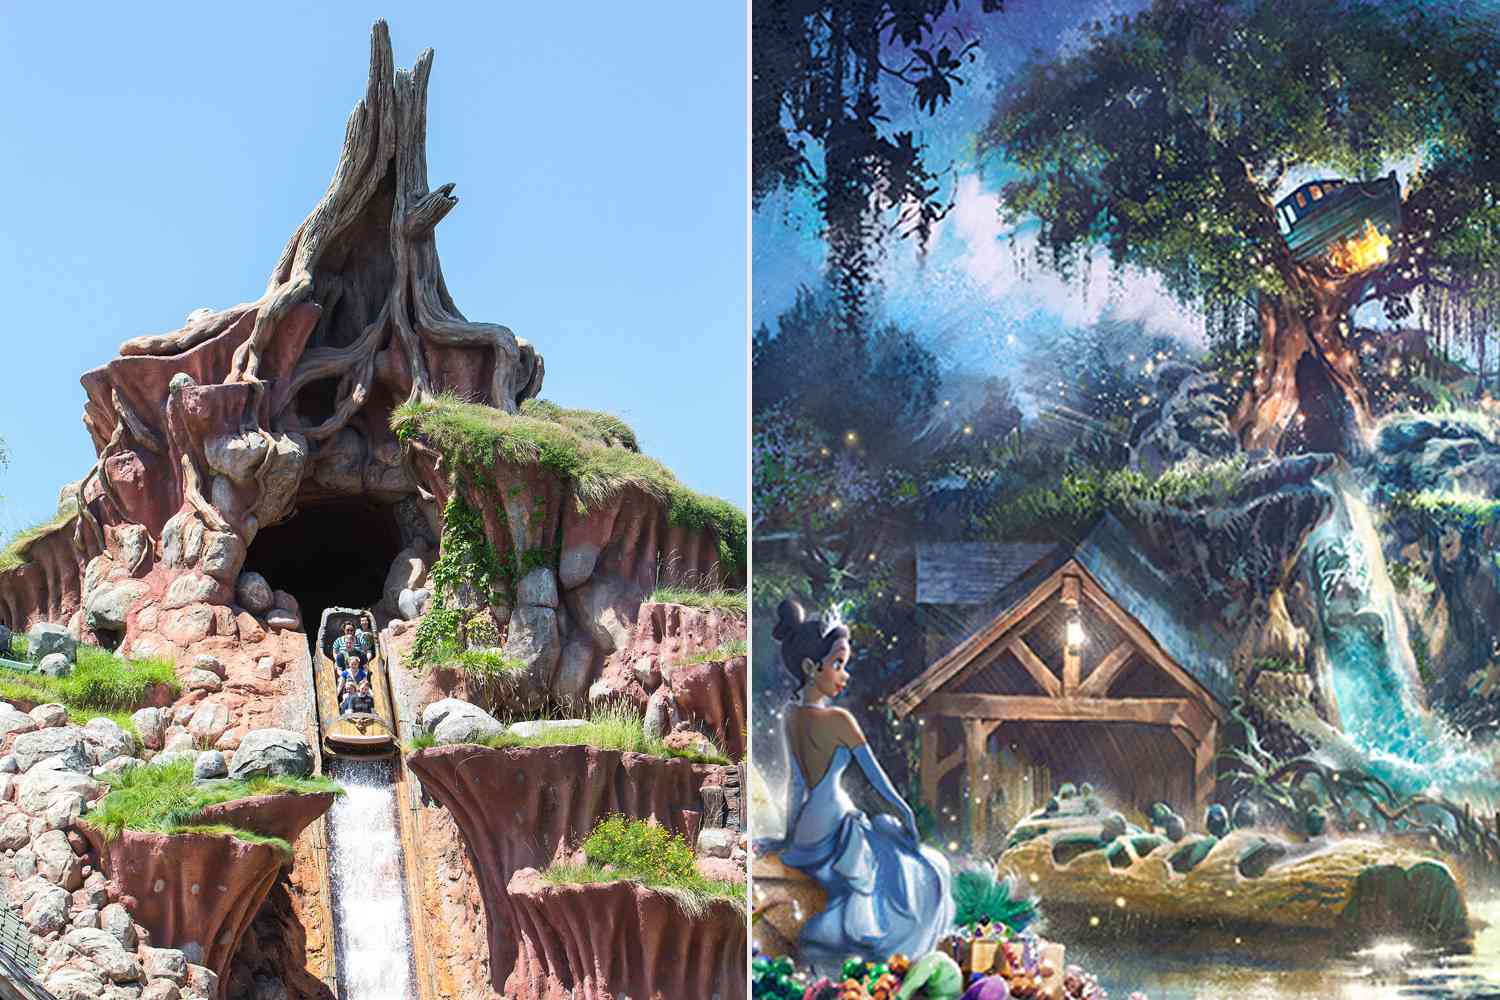 ‘The Princess And The Frog’ Actress Applauds Disney’s Decision To Re-Theme Splash Mountain